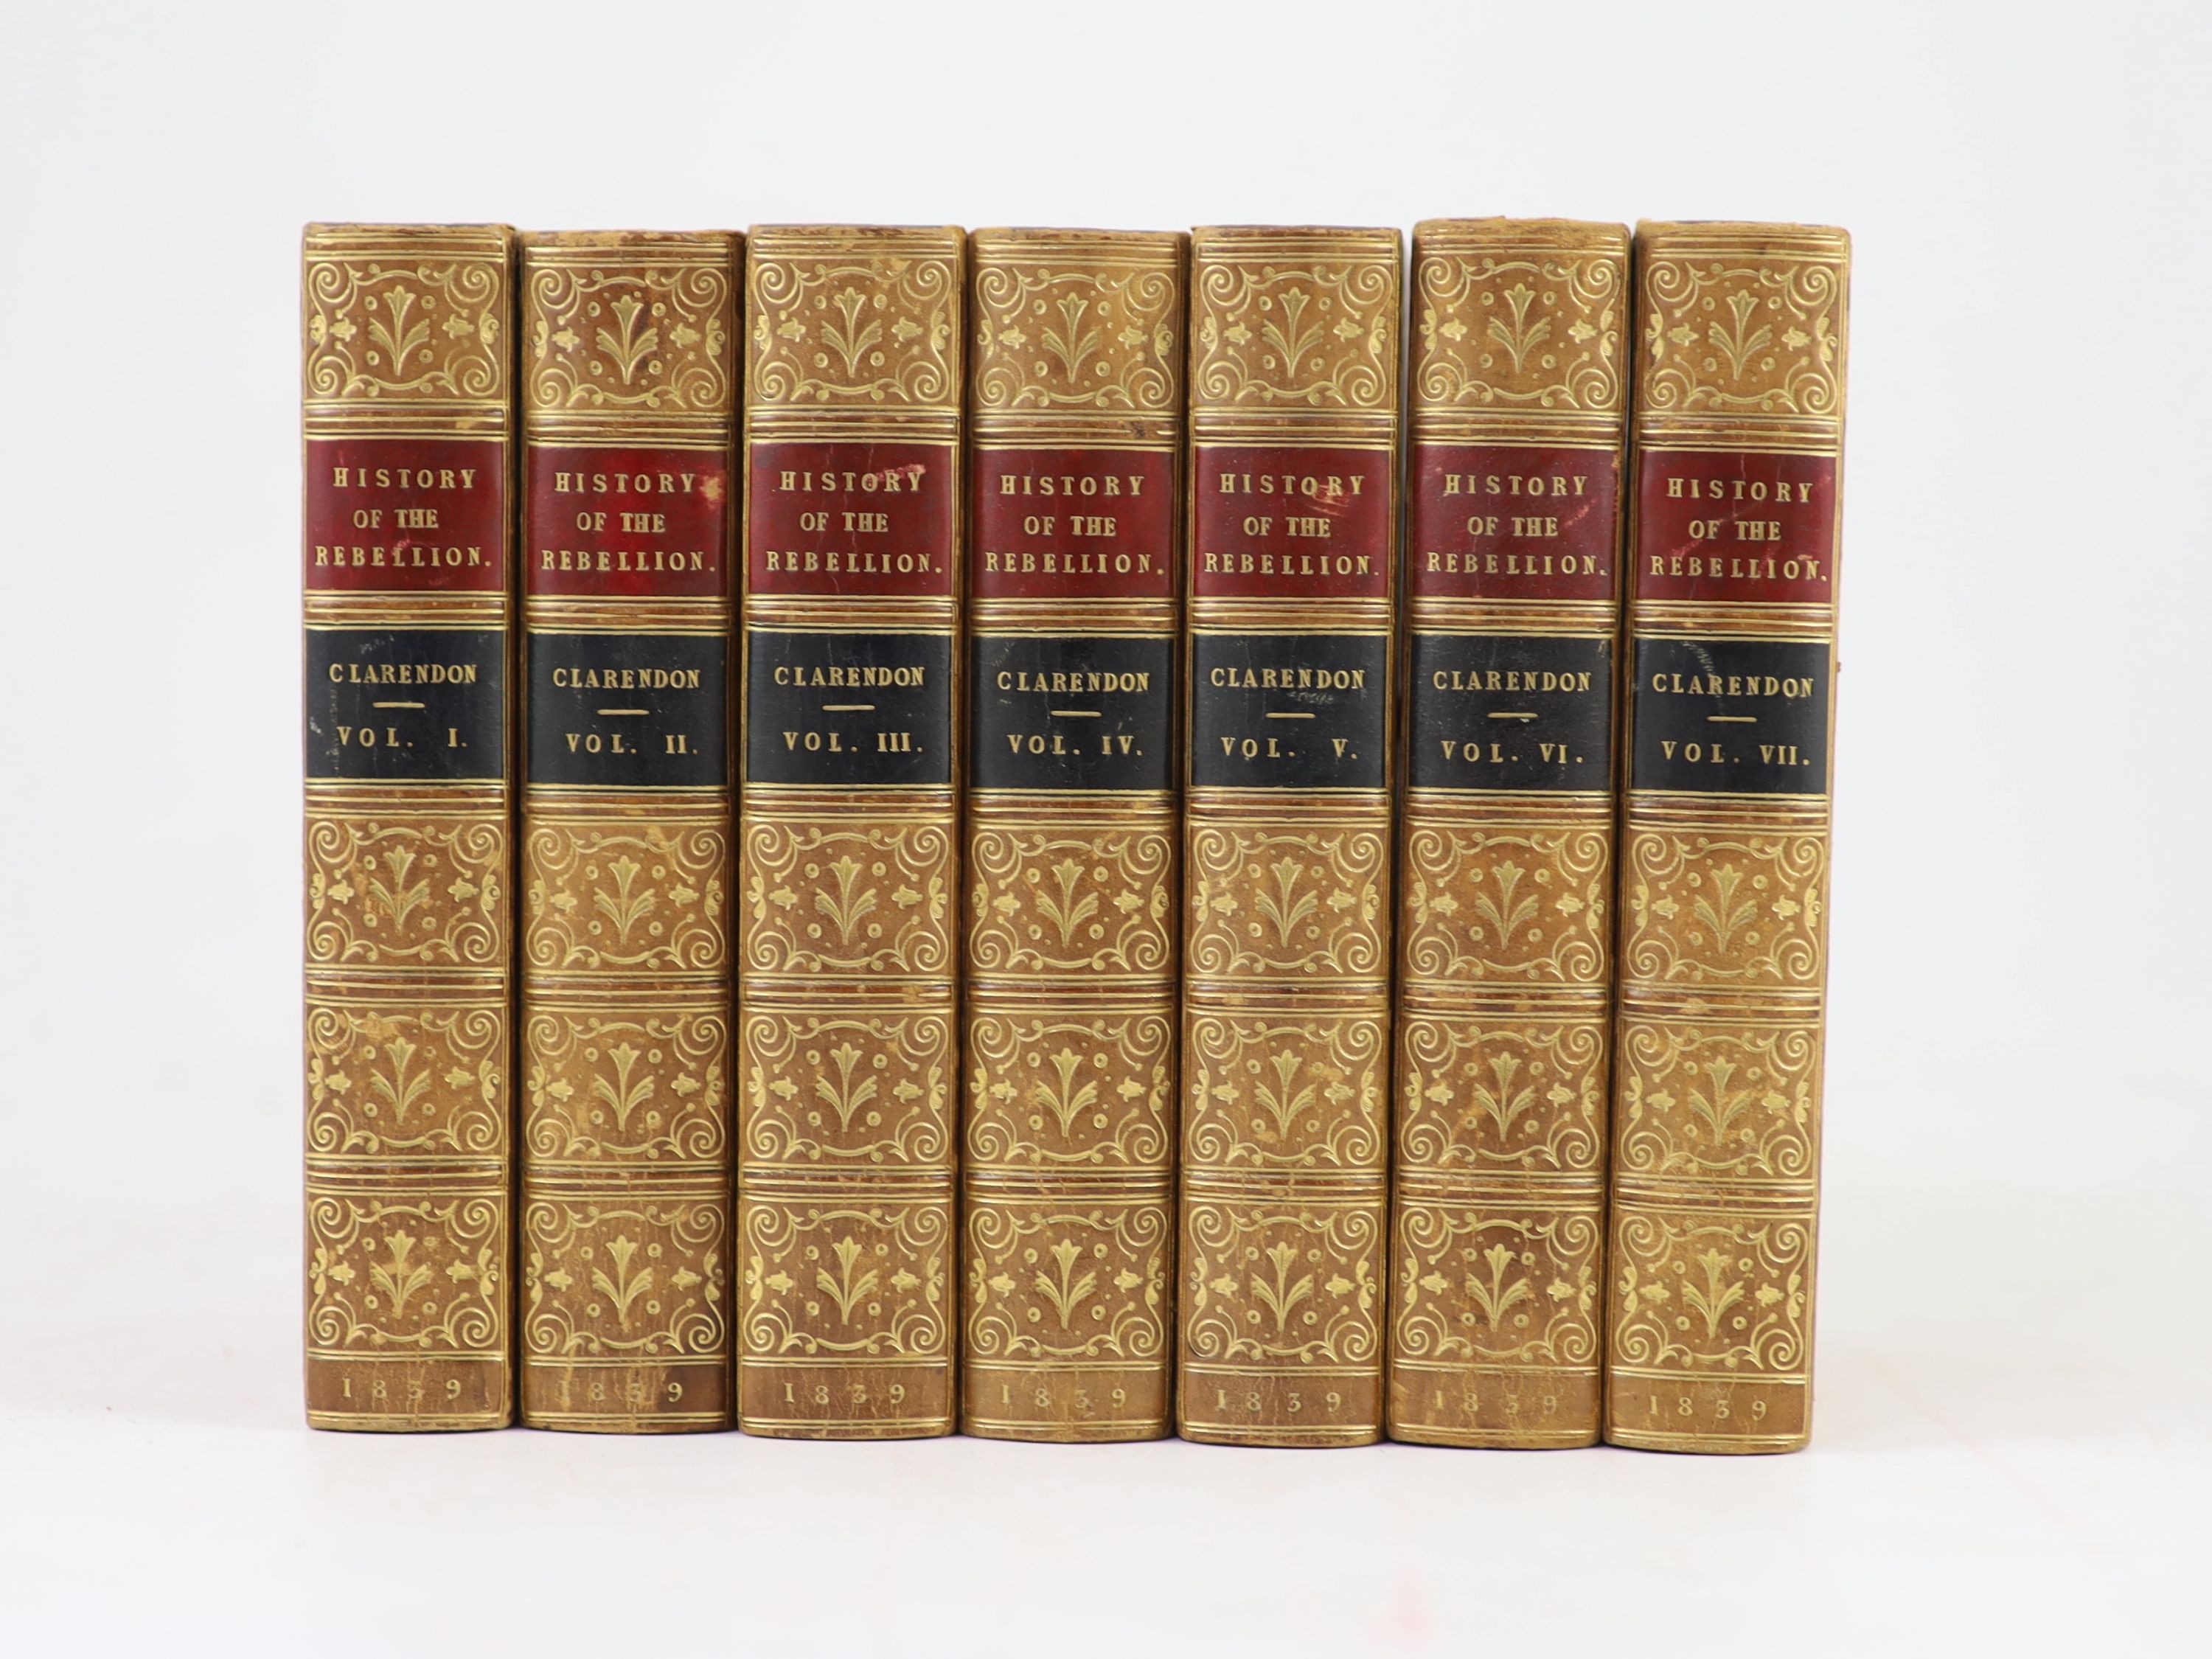 Clarendon, Edward Earl of - The History of the Rebellion and the Civil Wars in England. A new edition, from the original manuscript. 7 Vols. Gilt ruled calf with gilt panelled and decorated spines and 2 morocco labels. S